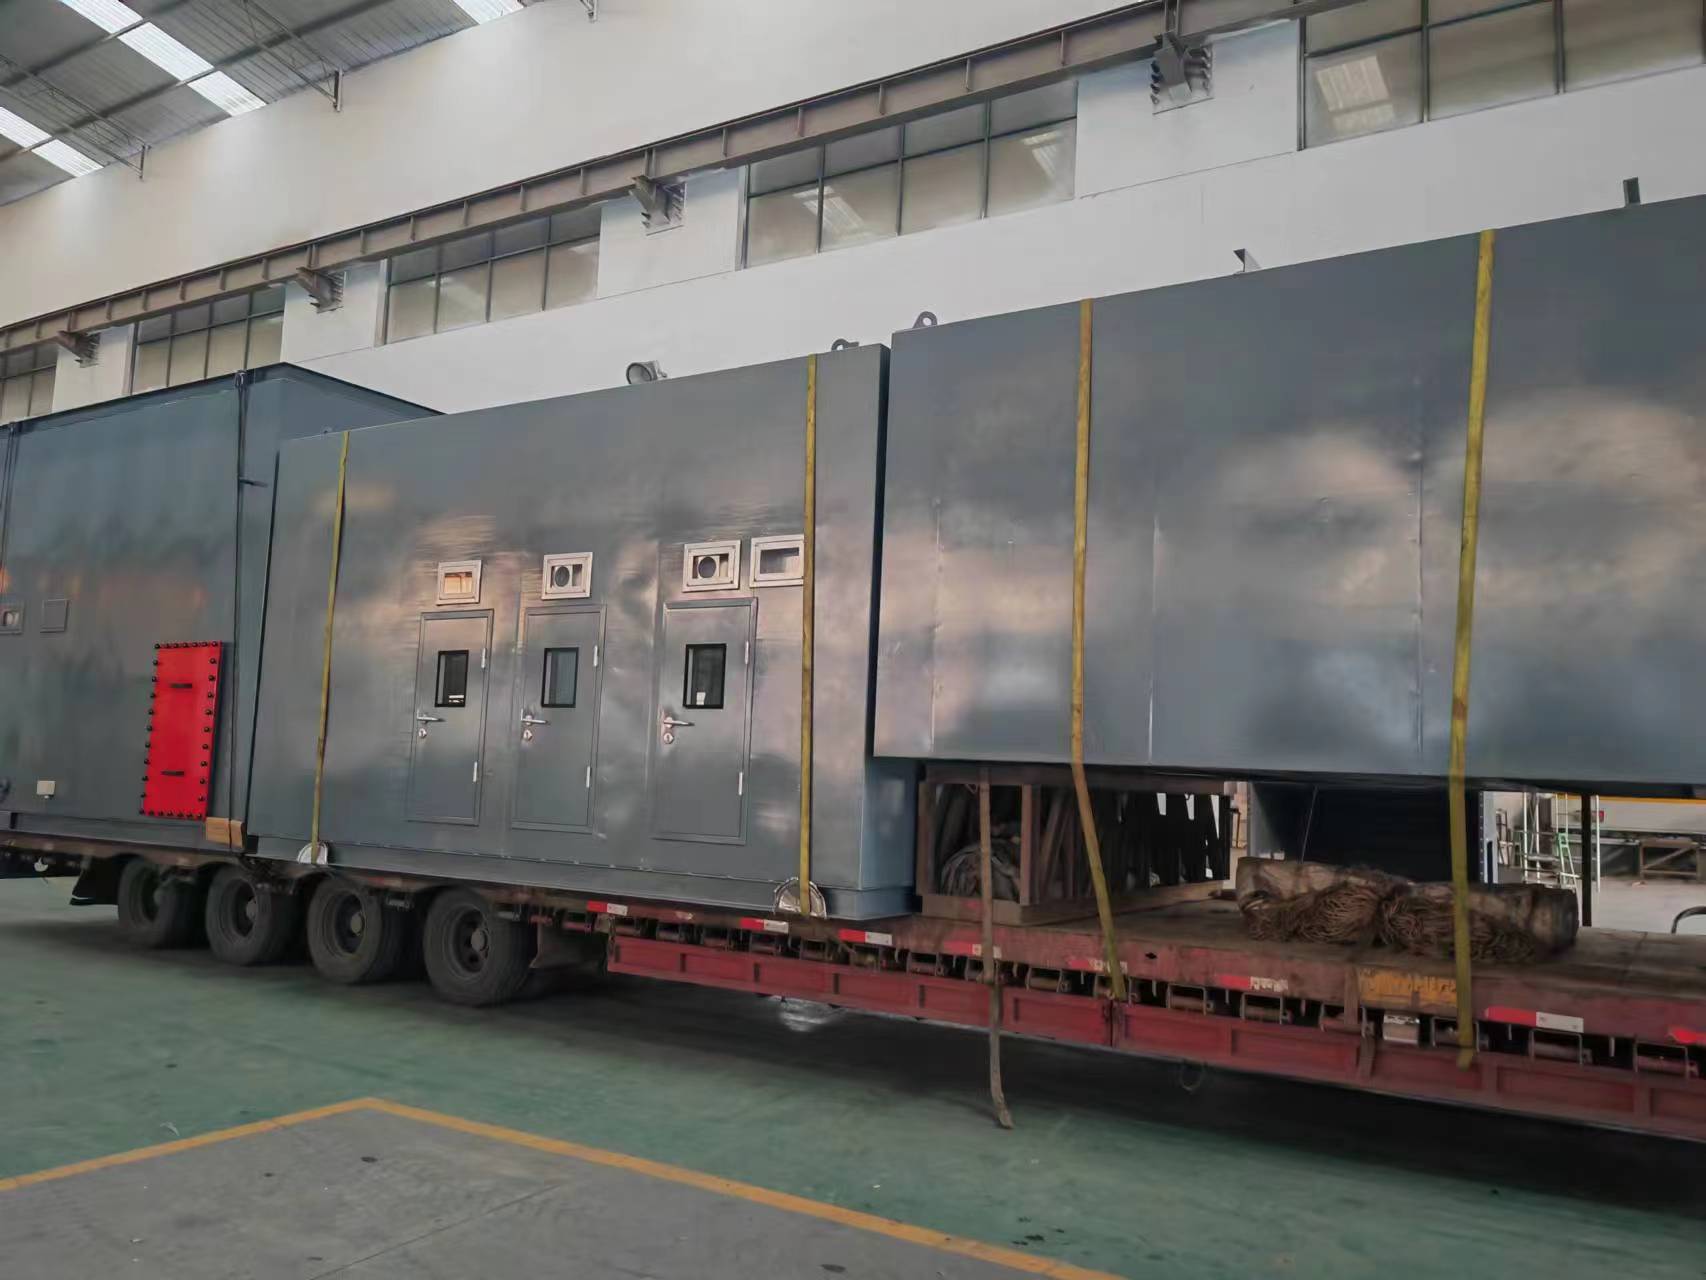 Shanghai Rail Transit Yuanjiang Road Base 150,000 air volume zeolite drum + 7,500 air volume catalytic combustion equipment delivery and installation